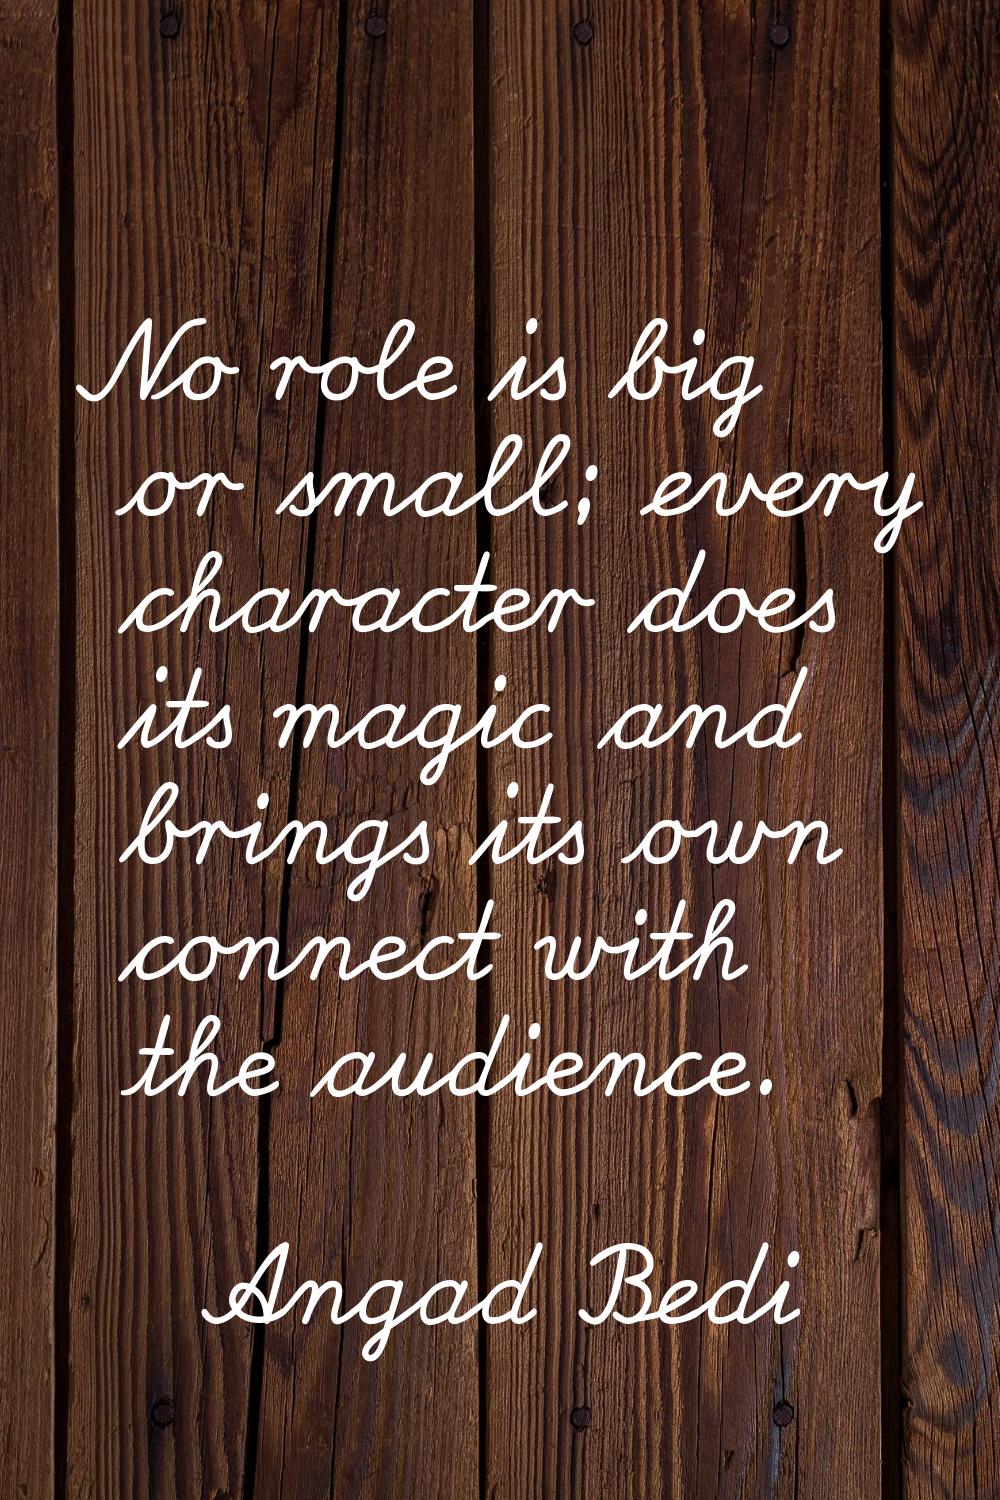 No role is big or small; every character does its magic and brings its own connect with the audienc